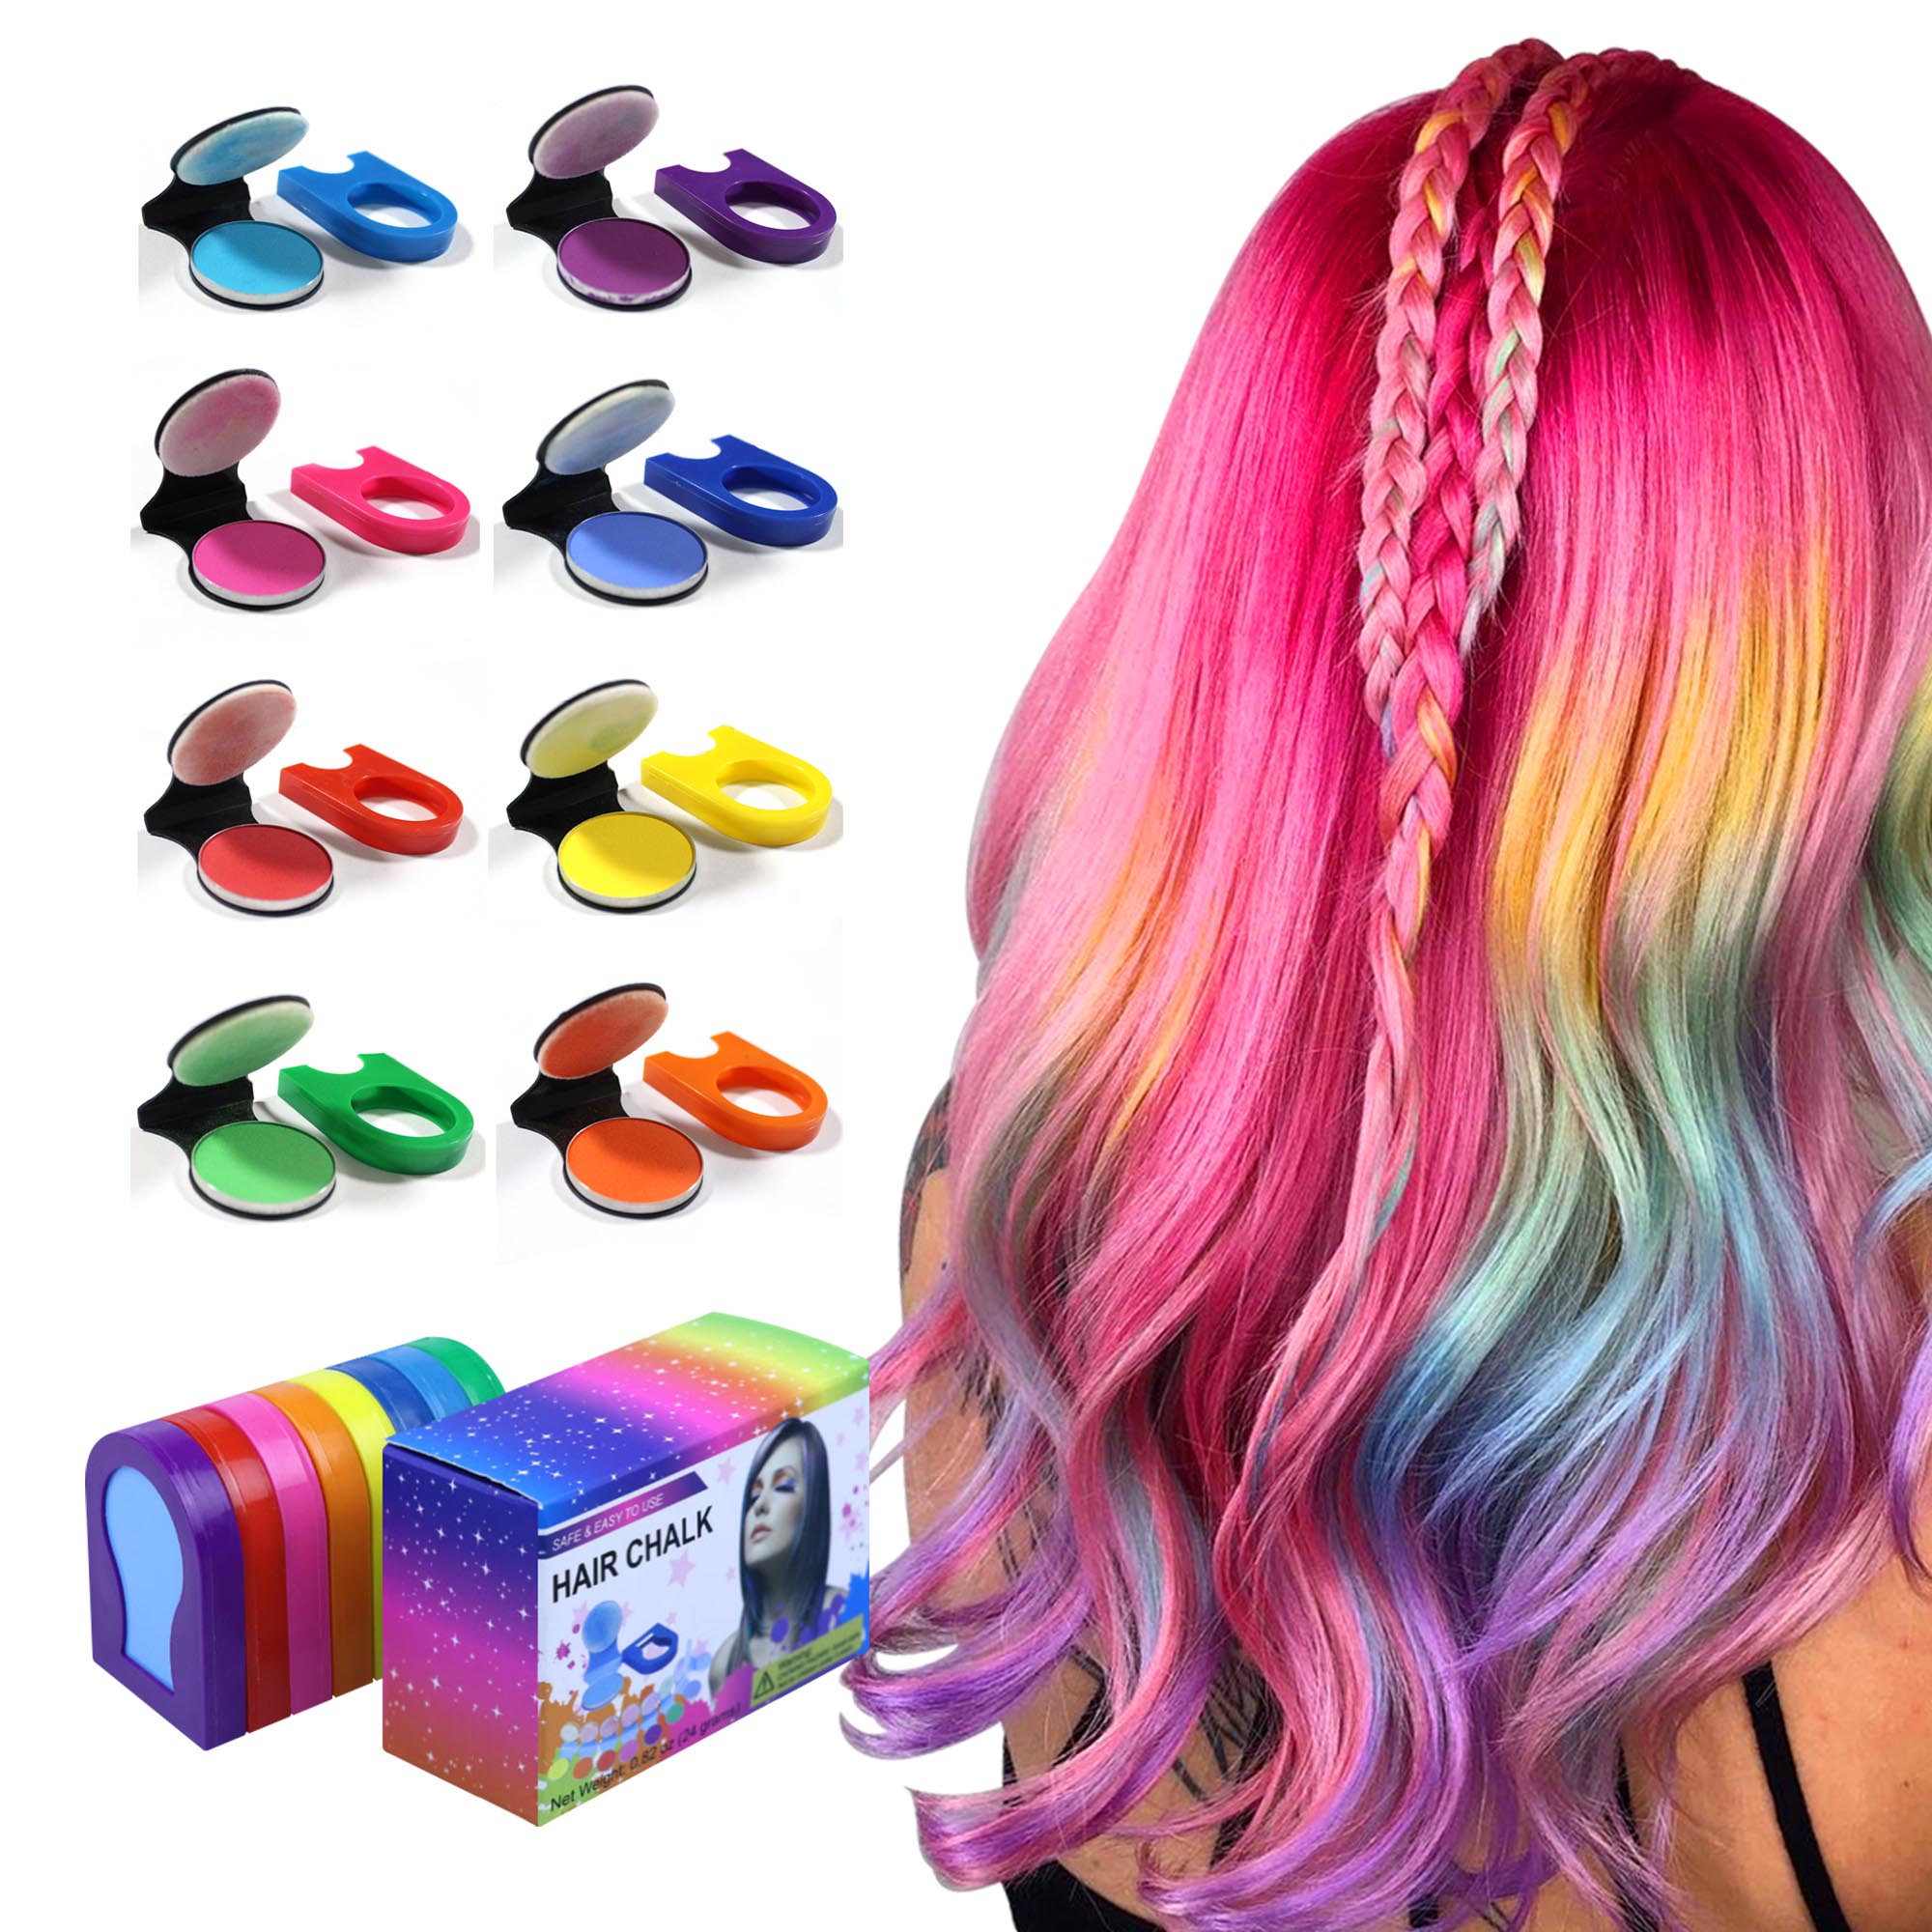 Hair Chalk Pinkiou Temporary Bright Hair Color Dye for Girls Kids, Washable Hair Chalk Set/Kit for Girls New Year Birthday Party Cosplay DIY - 8 Colors - image 1 of 10